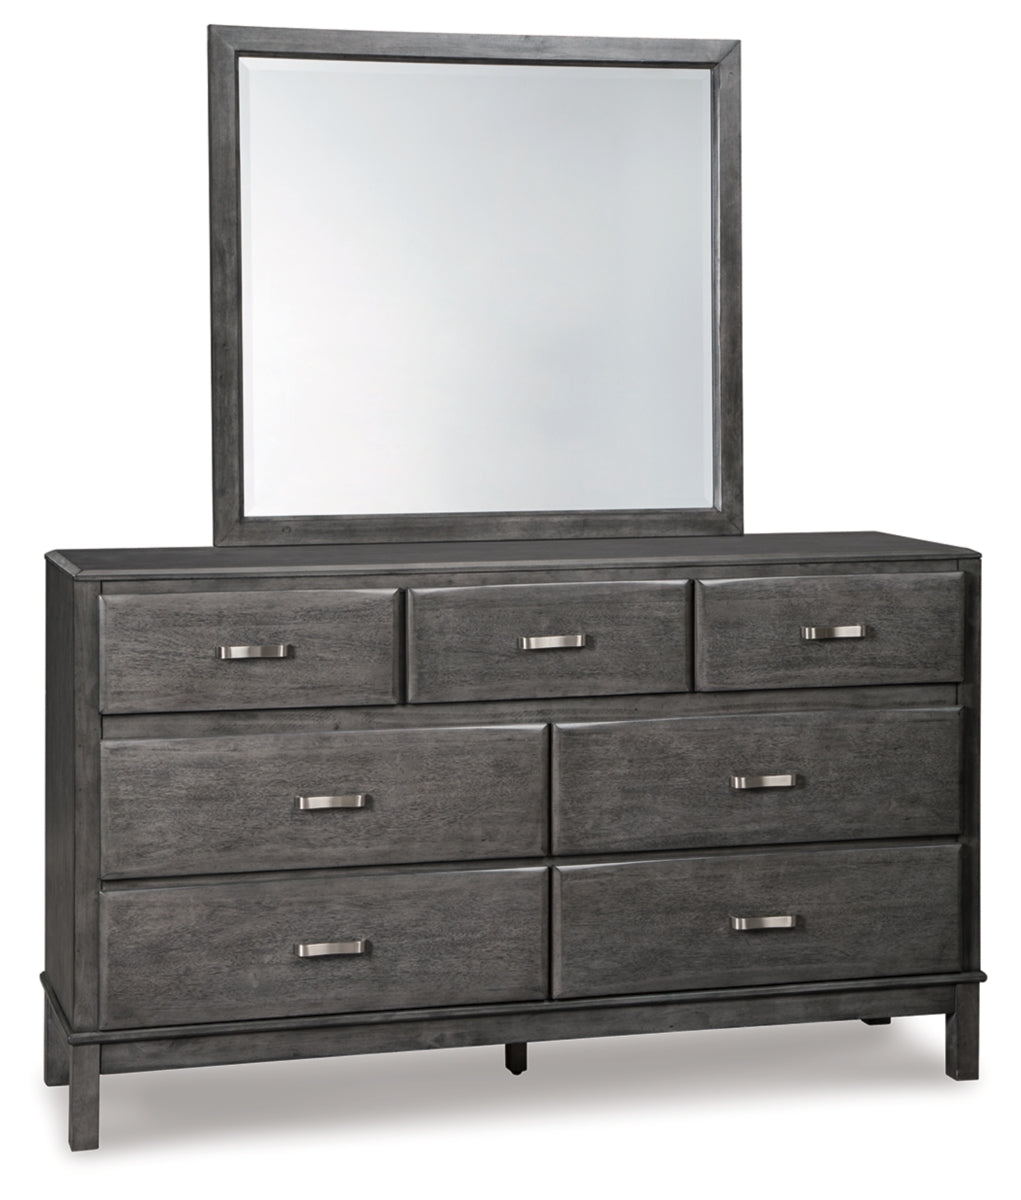 Caitbrook Full Storage Bed with 7 Storage Drawers with Mirrored Dresser and 2 Nightstands